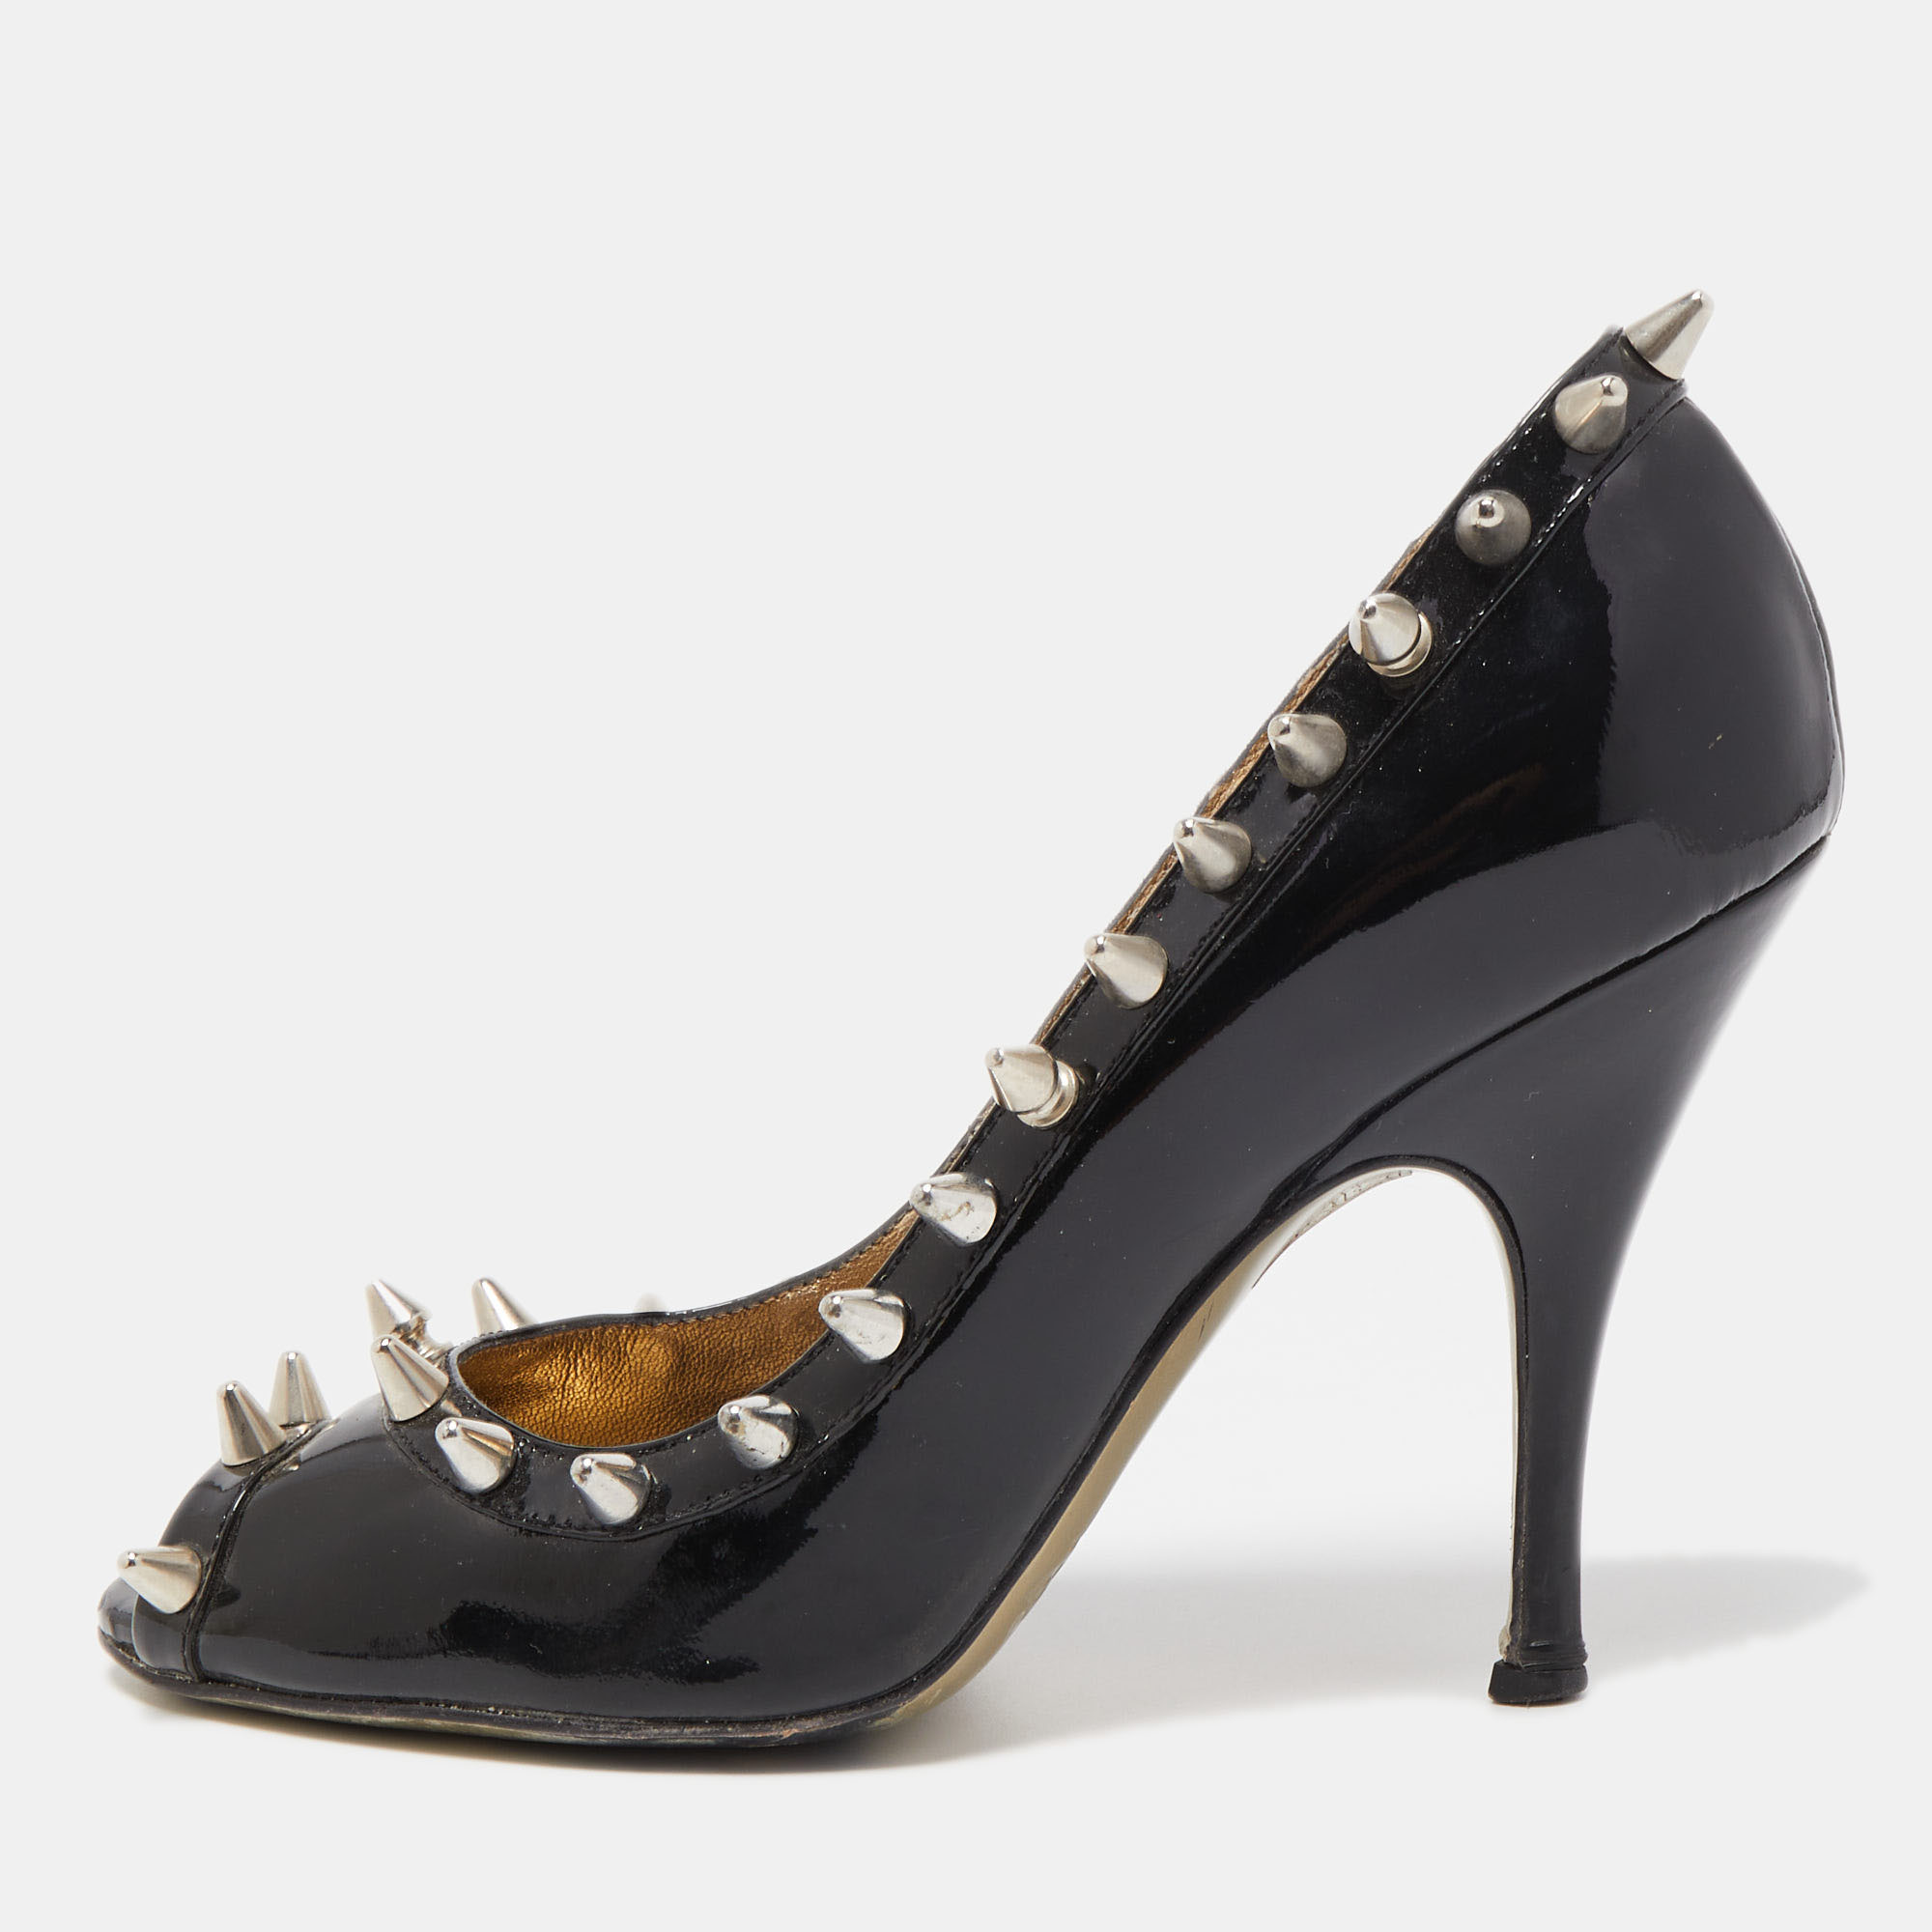 Pre-owned Dolce & Gabbana Black Patent Studded Peep Toe Pumps Size 38